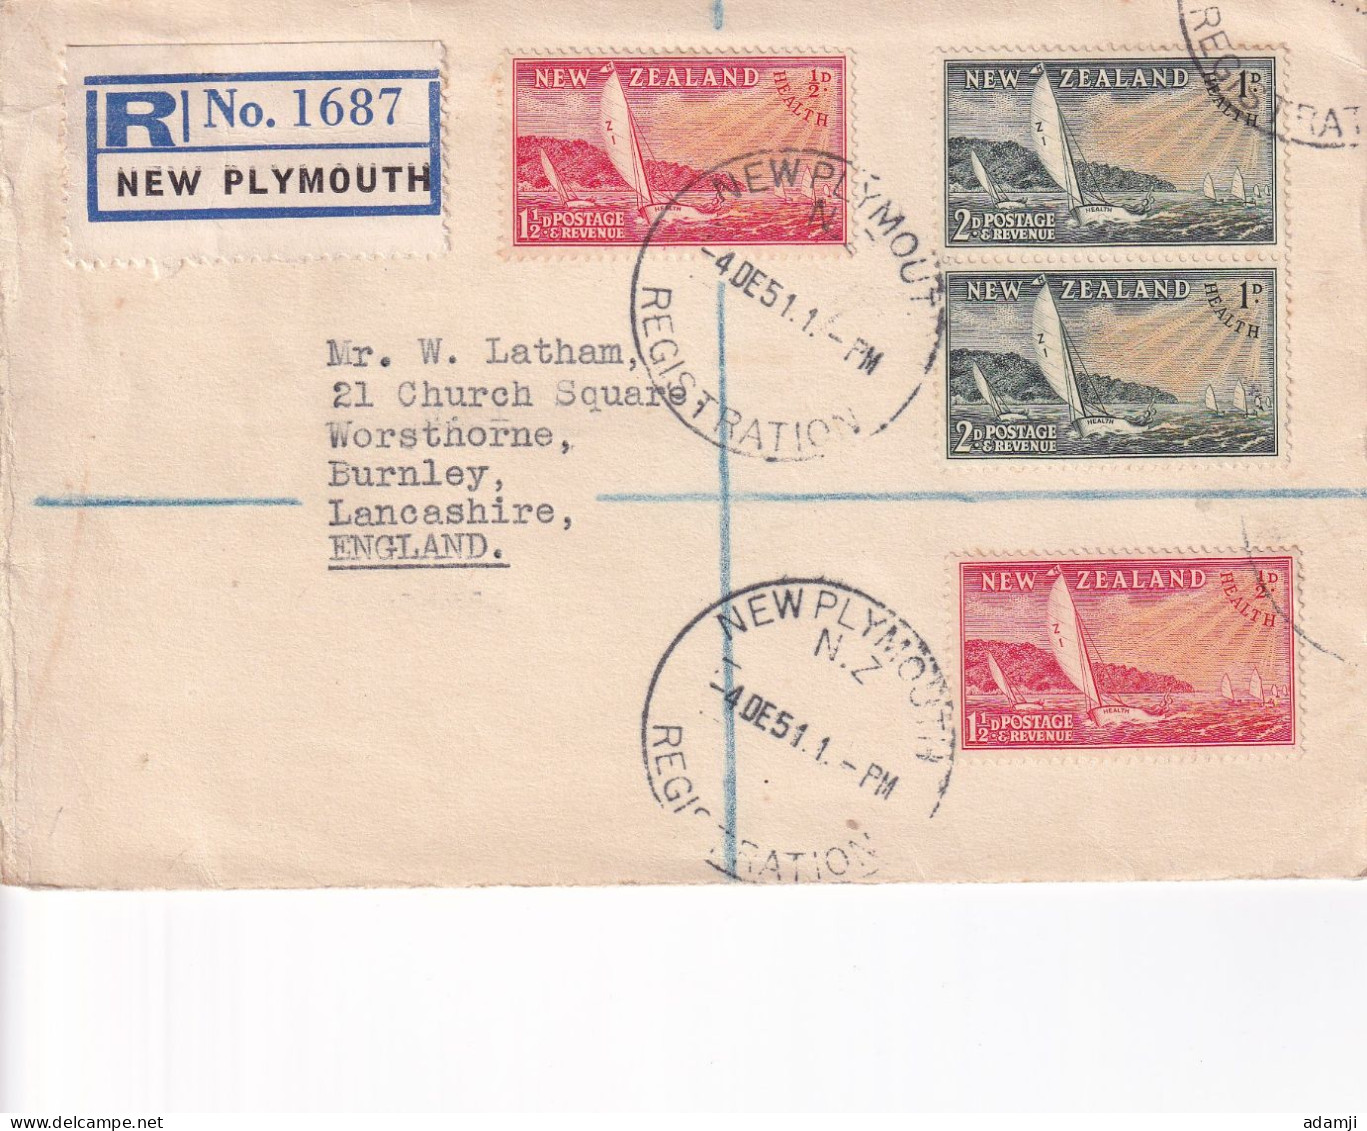 NEW ZEALAND 1951 HEALTH SET REGD SET FDC COVER TO ENGLAND. - Lettres & Documents